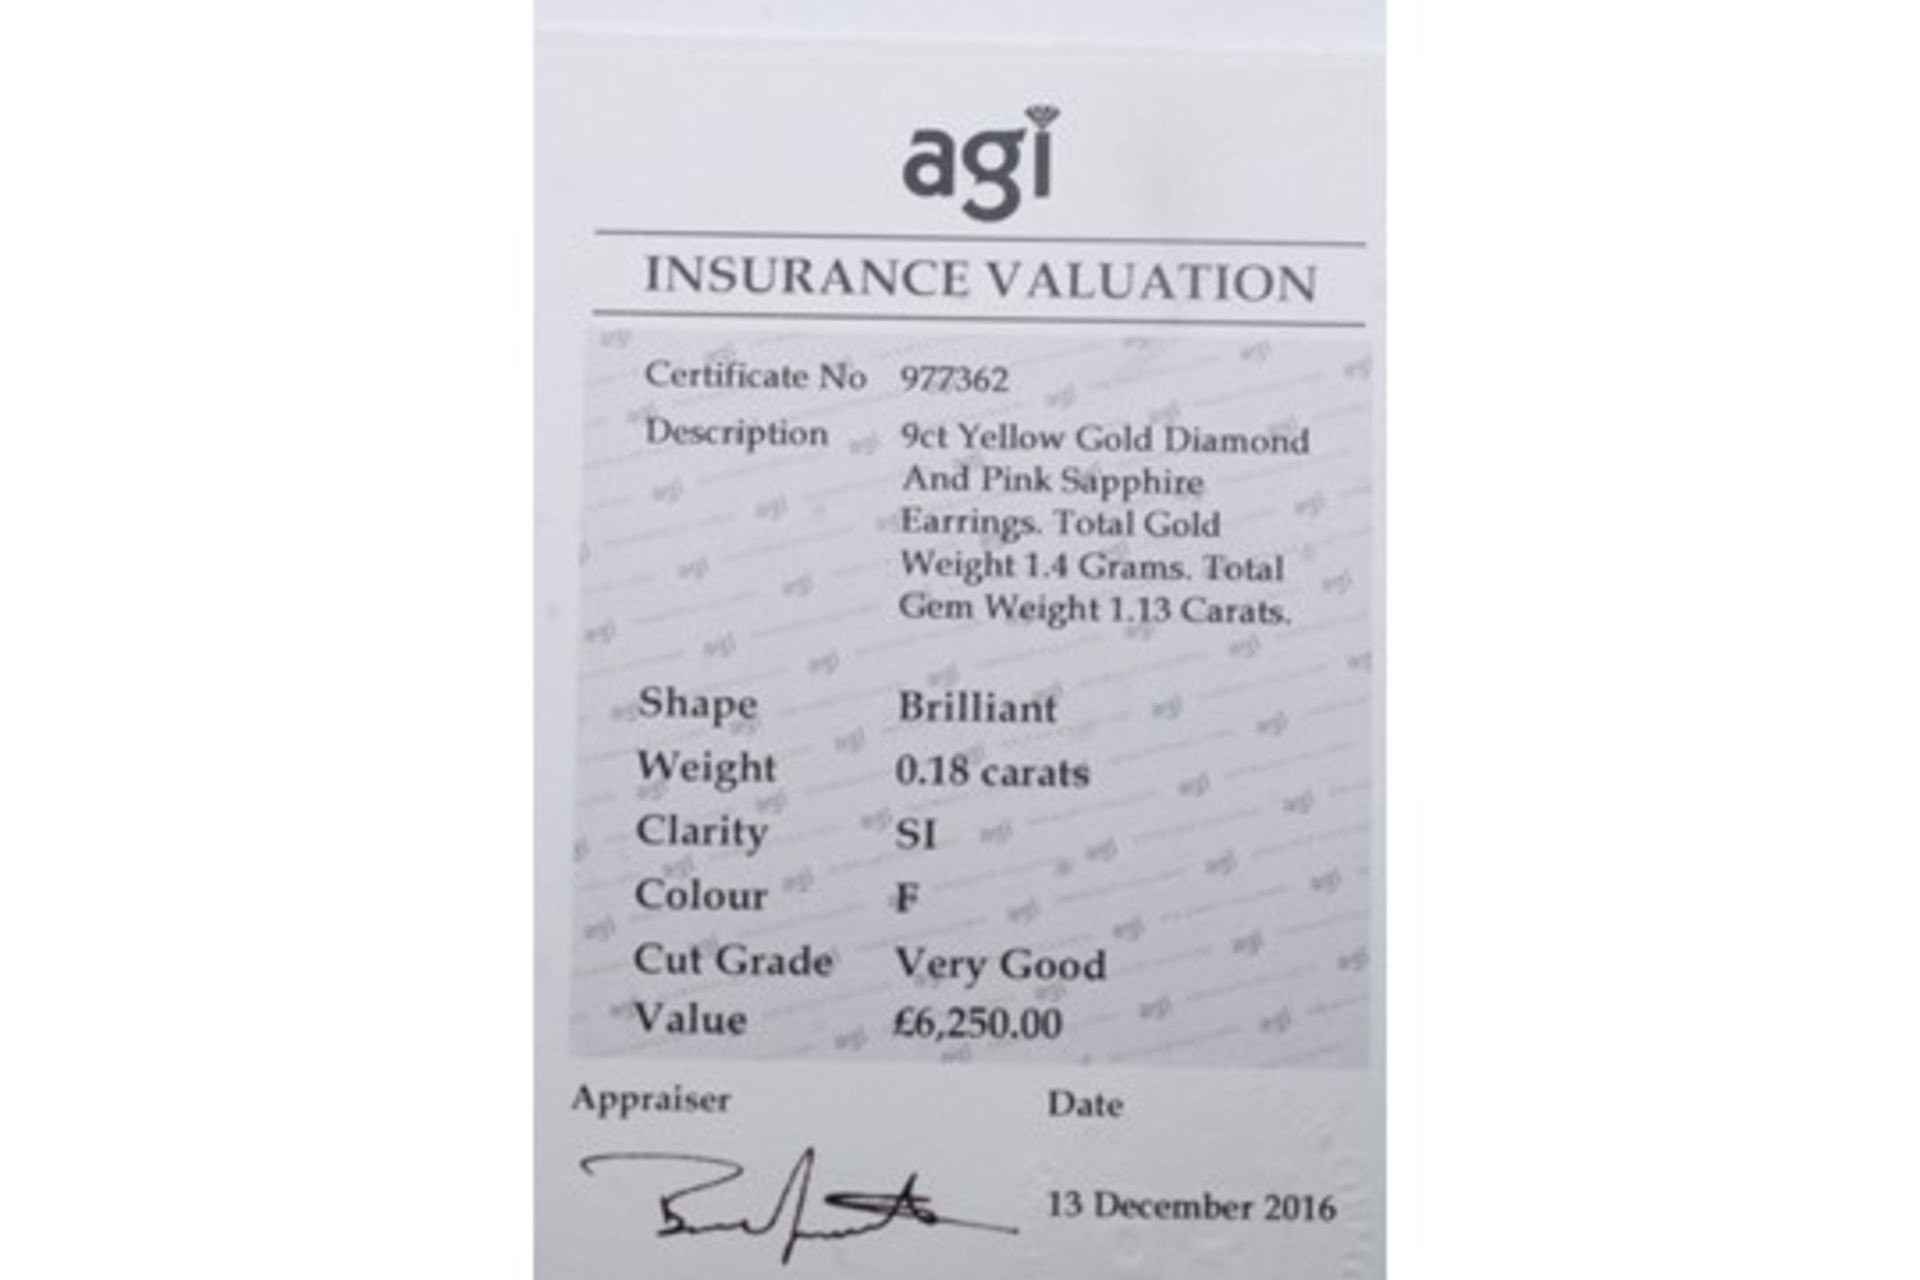 9ct Yellow Gold, Natural Pink Sapphire And Diamond Earrings, Includes AGI Insurance Certificate - Image 3 of 3